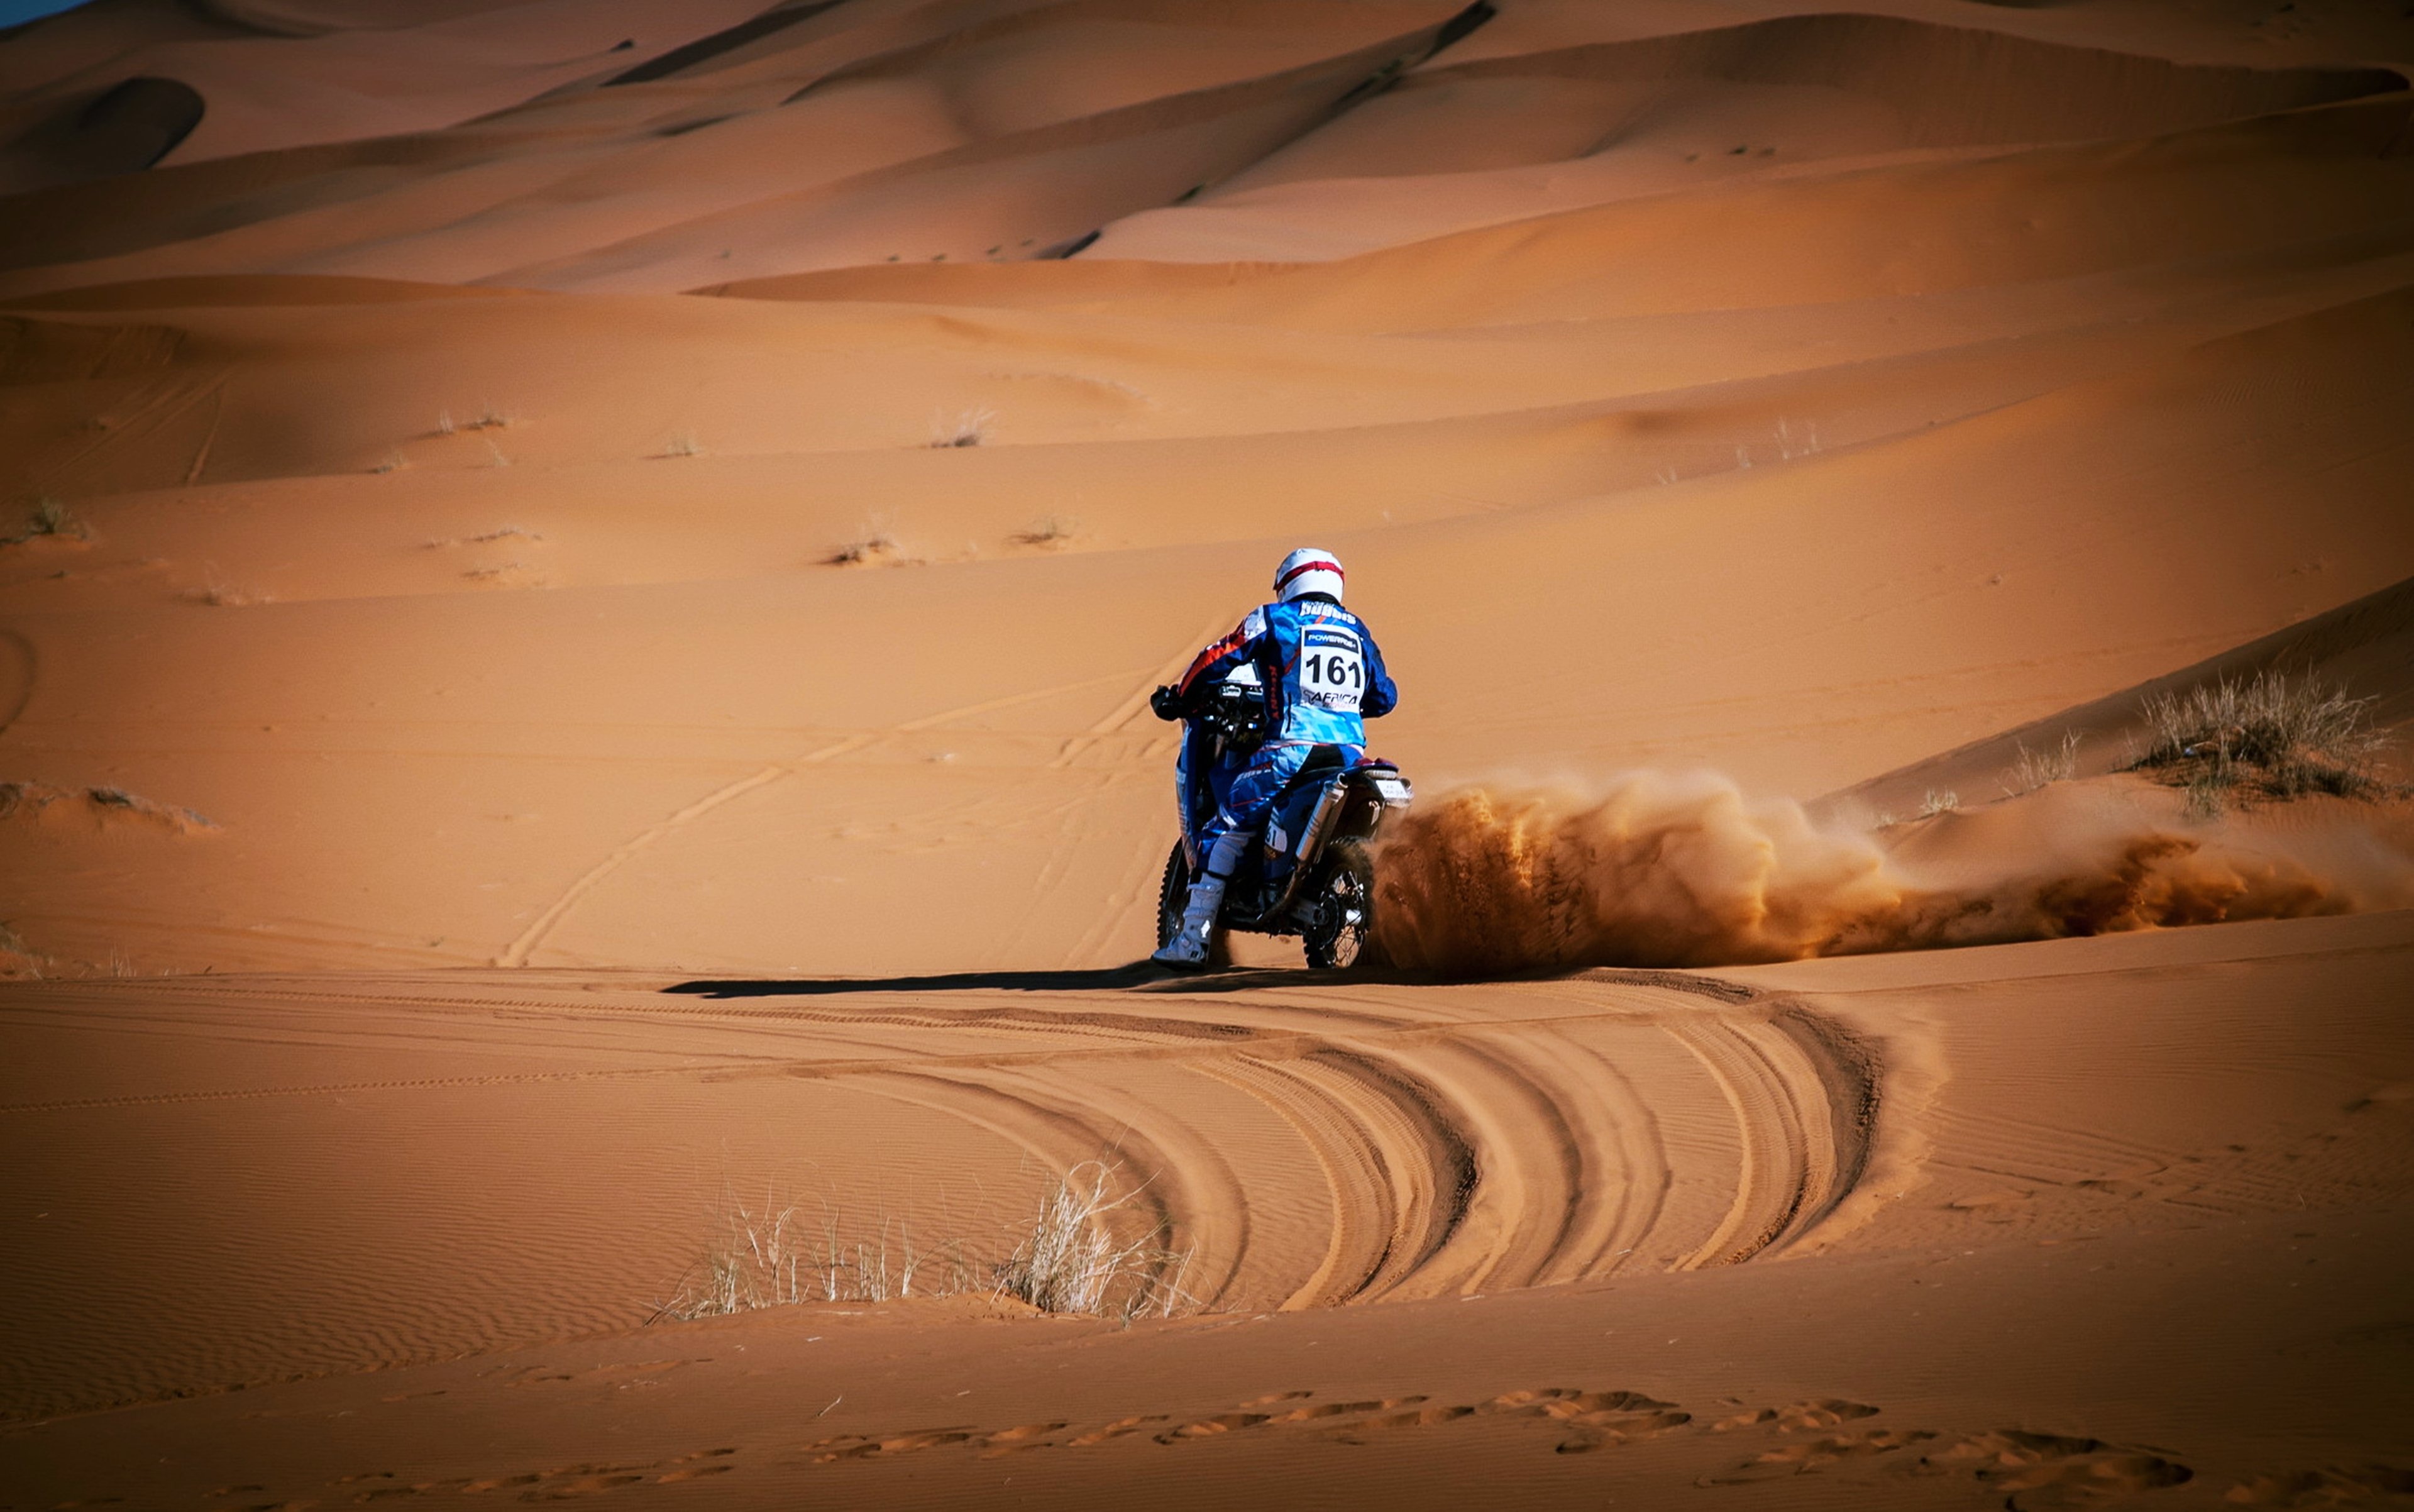 desert, Nature, Sand, Motorcycles, Races, Earth, Sports, Landscapes, Motors, Speed Wallpaper